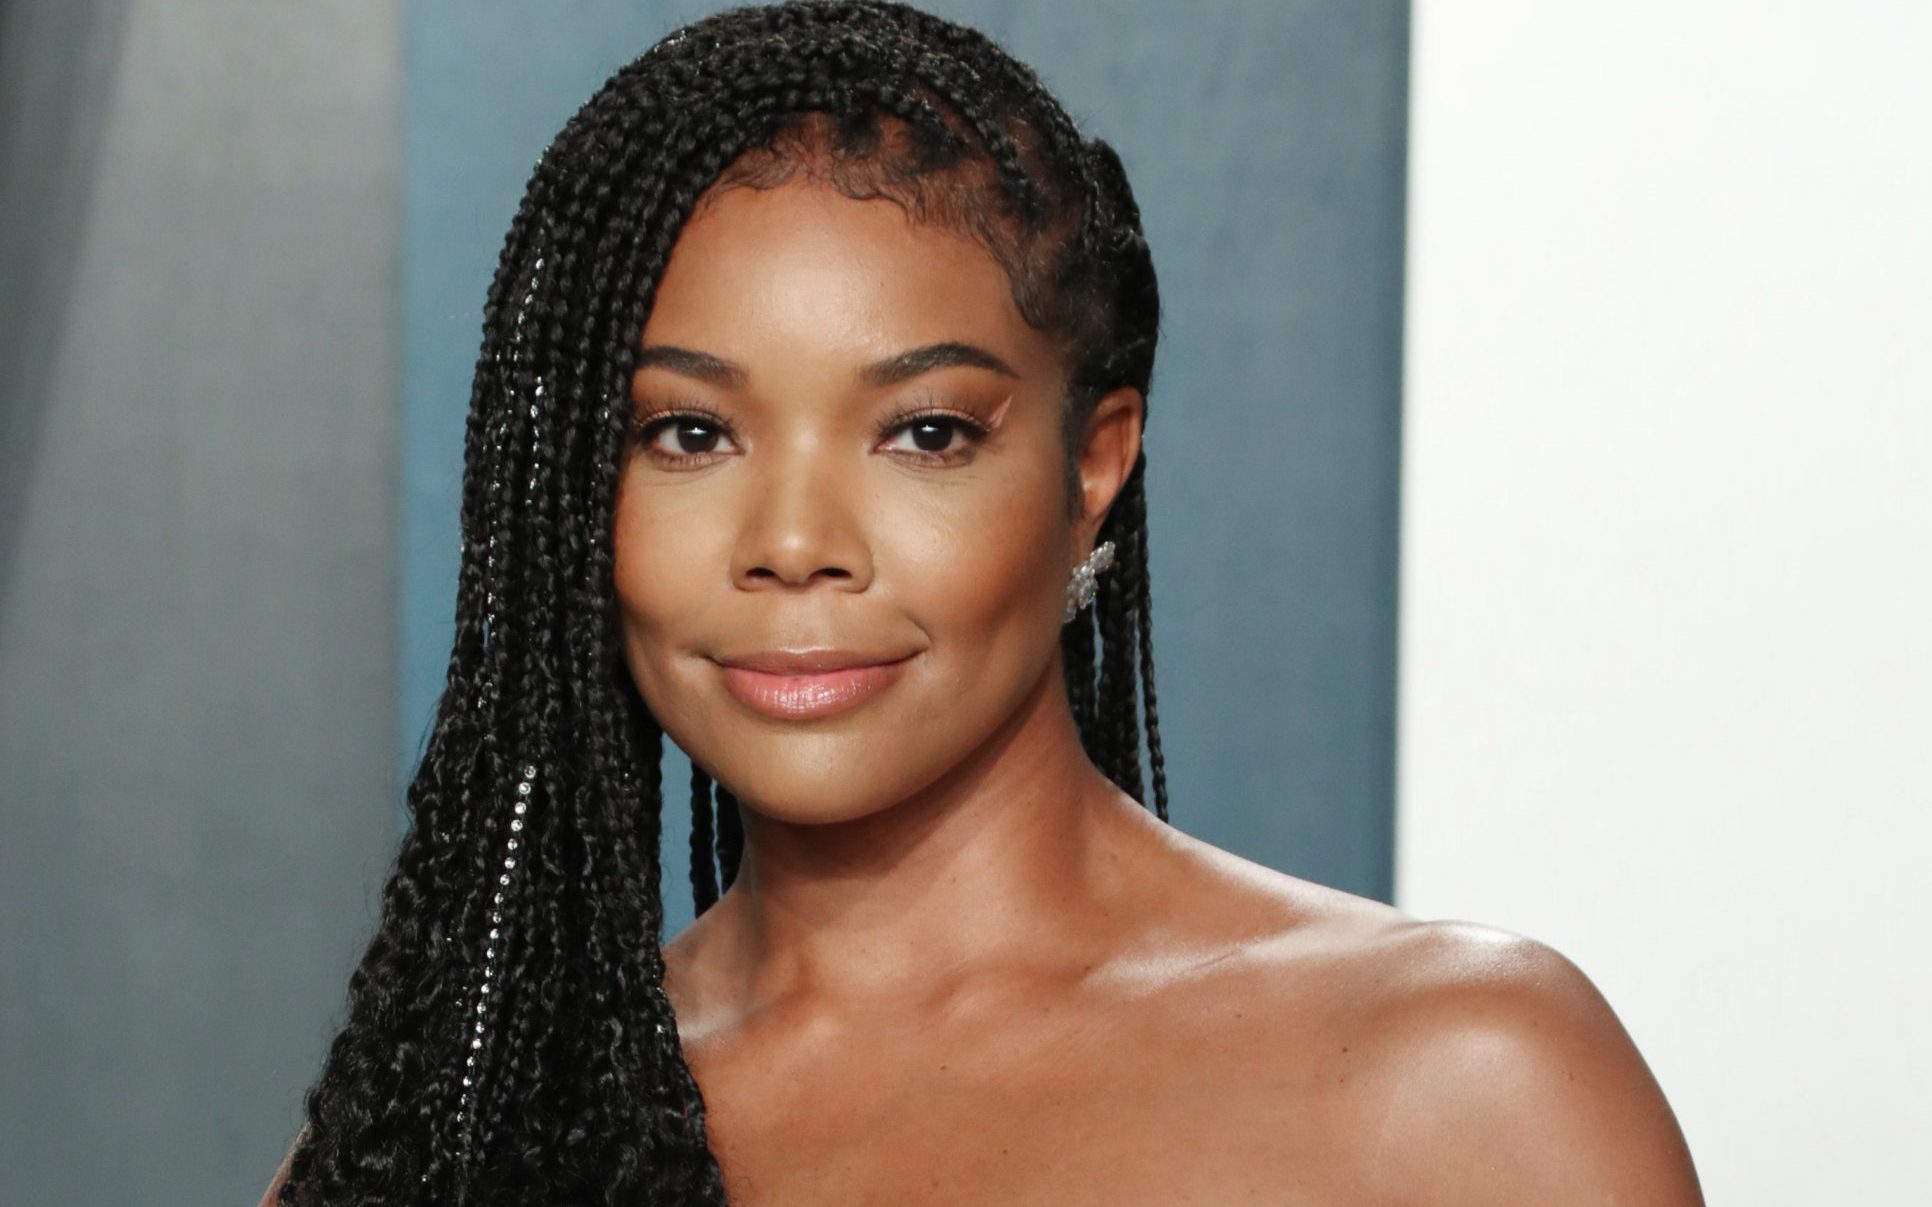 Gabrielle Union and ‘America’s Got Talent’ Reach ‘Amicable’ Settlement Over Workplace Toxicity Claims